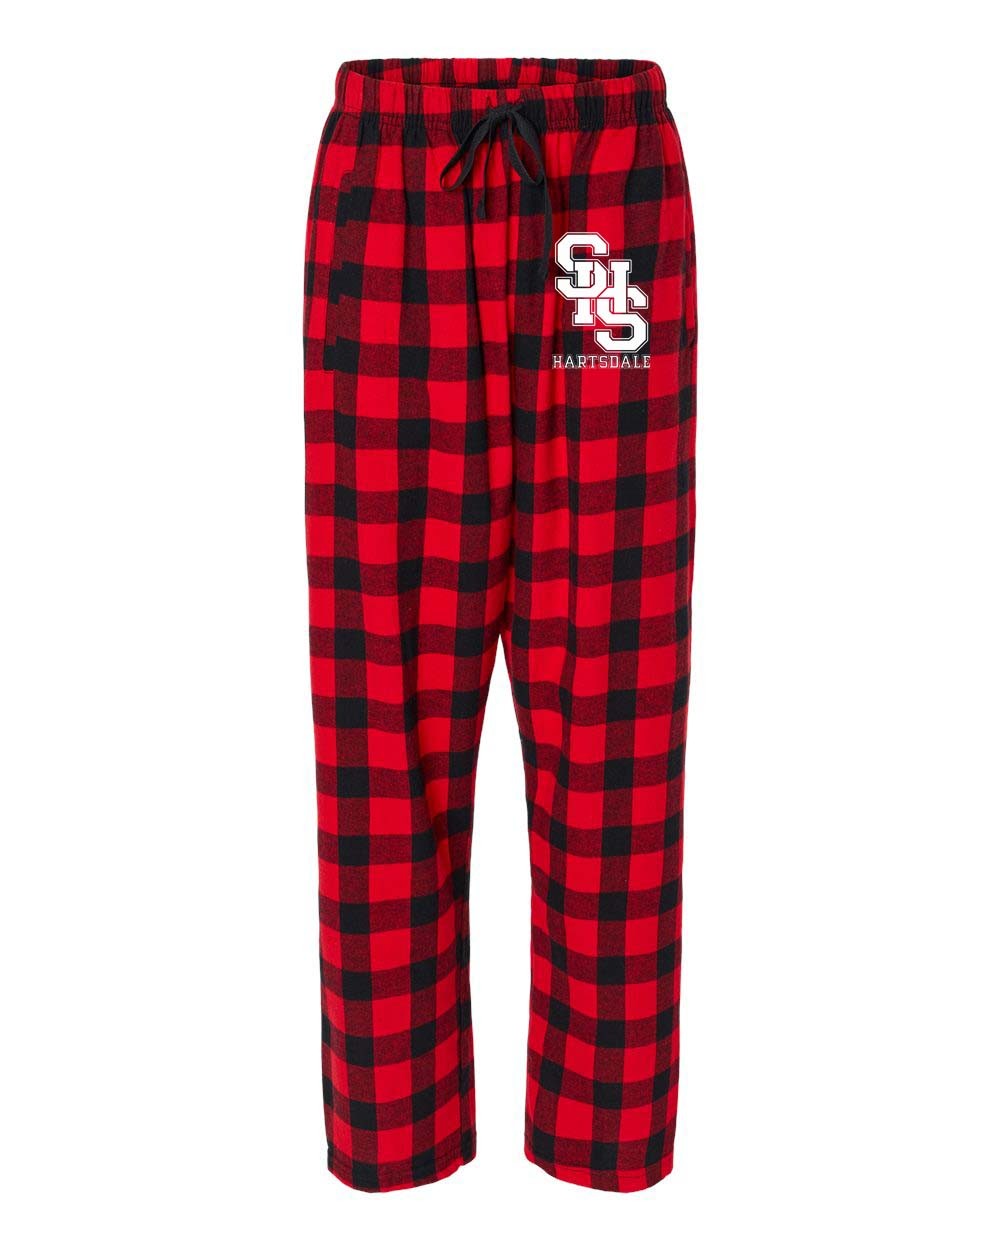 SHS Spirit Women's Pajama Pants w/ White Logo - Please Allow 2-3 Weeks for Delivery